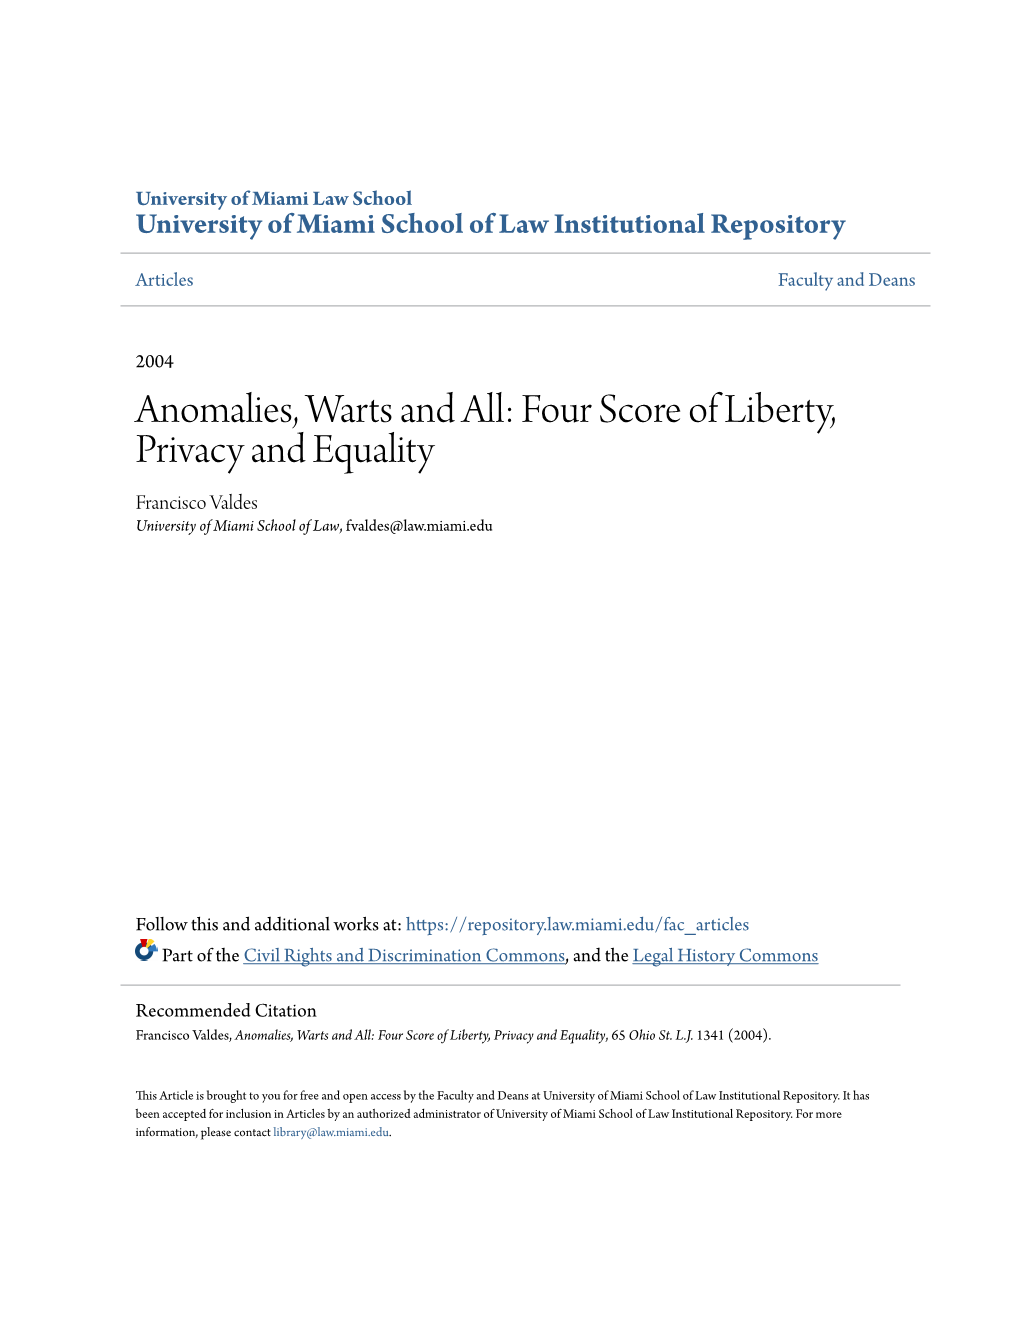 Anomalies, Warts and All: Four Score of Liberty, Privacy and Equality Francisco Valdes University of Miami School of Law, Fvaldes@Law.Miami.Edu